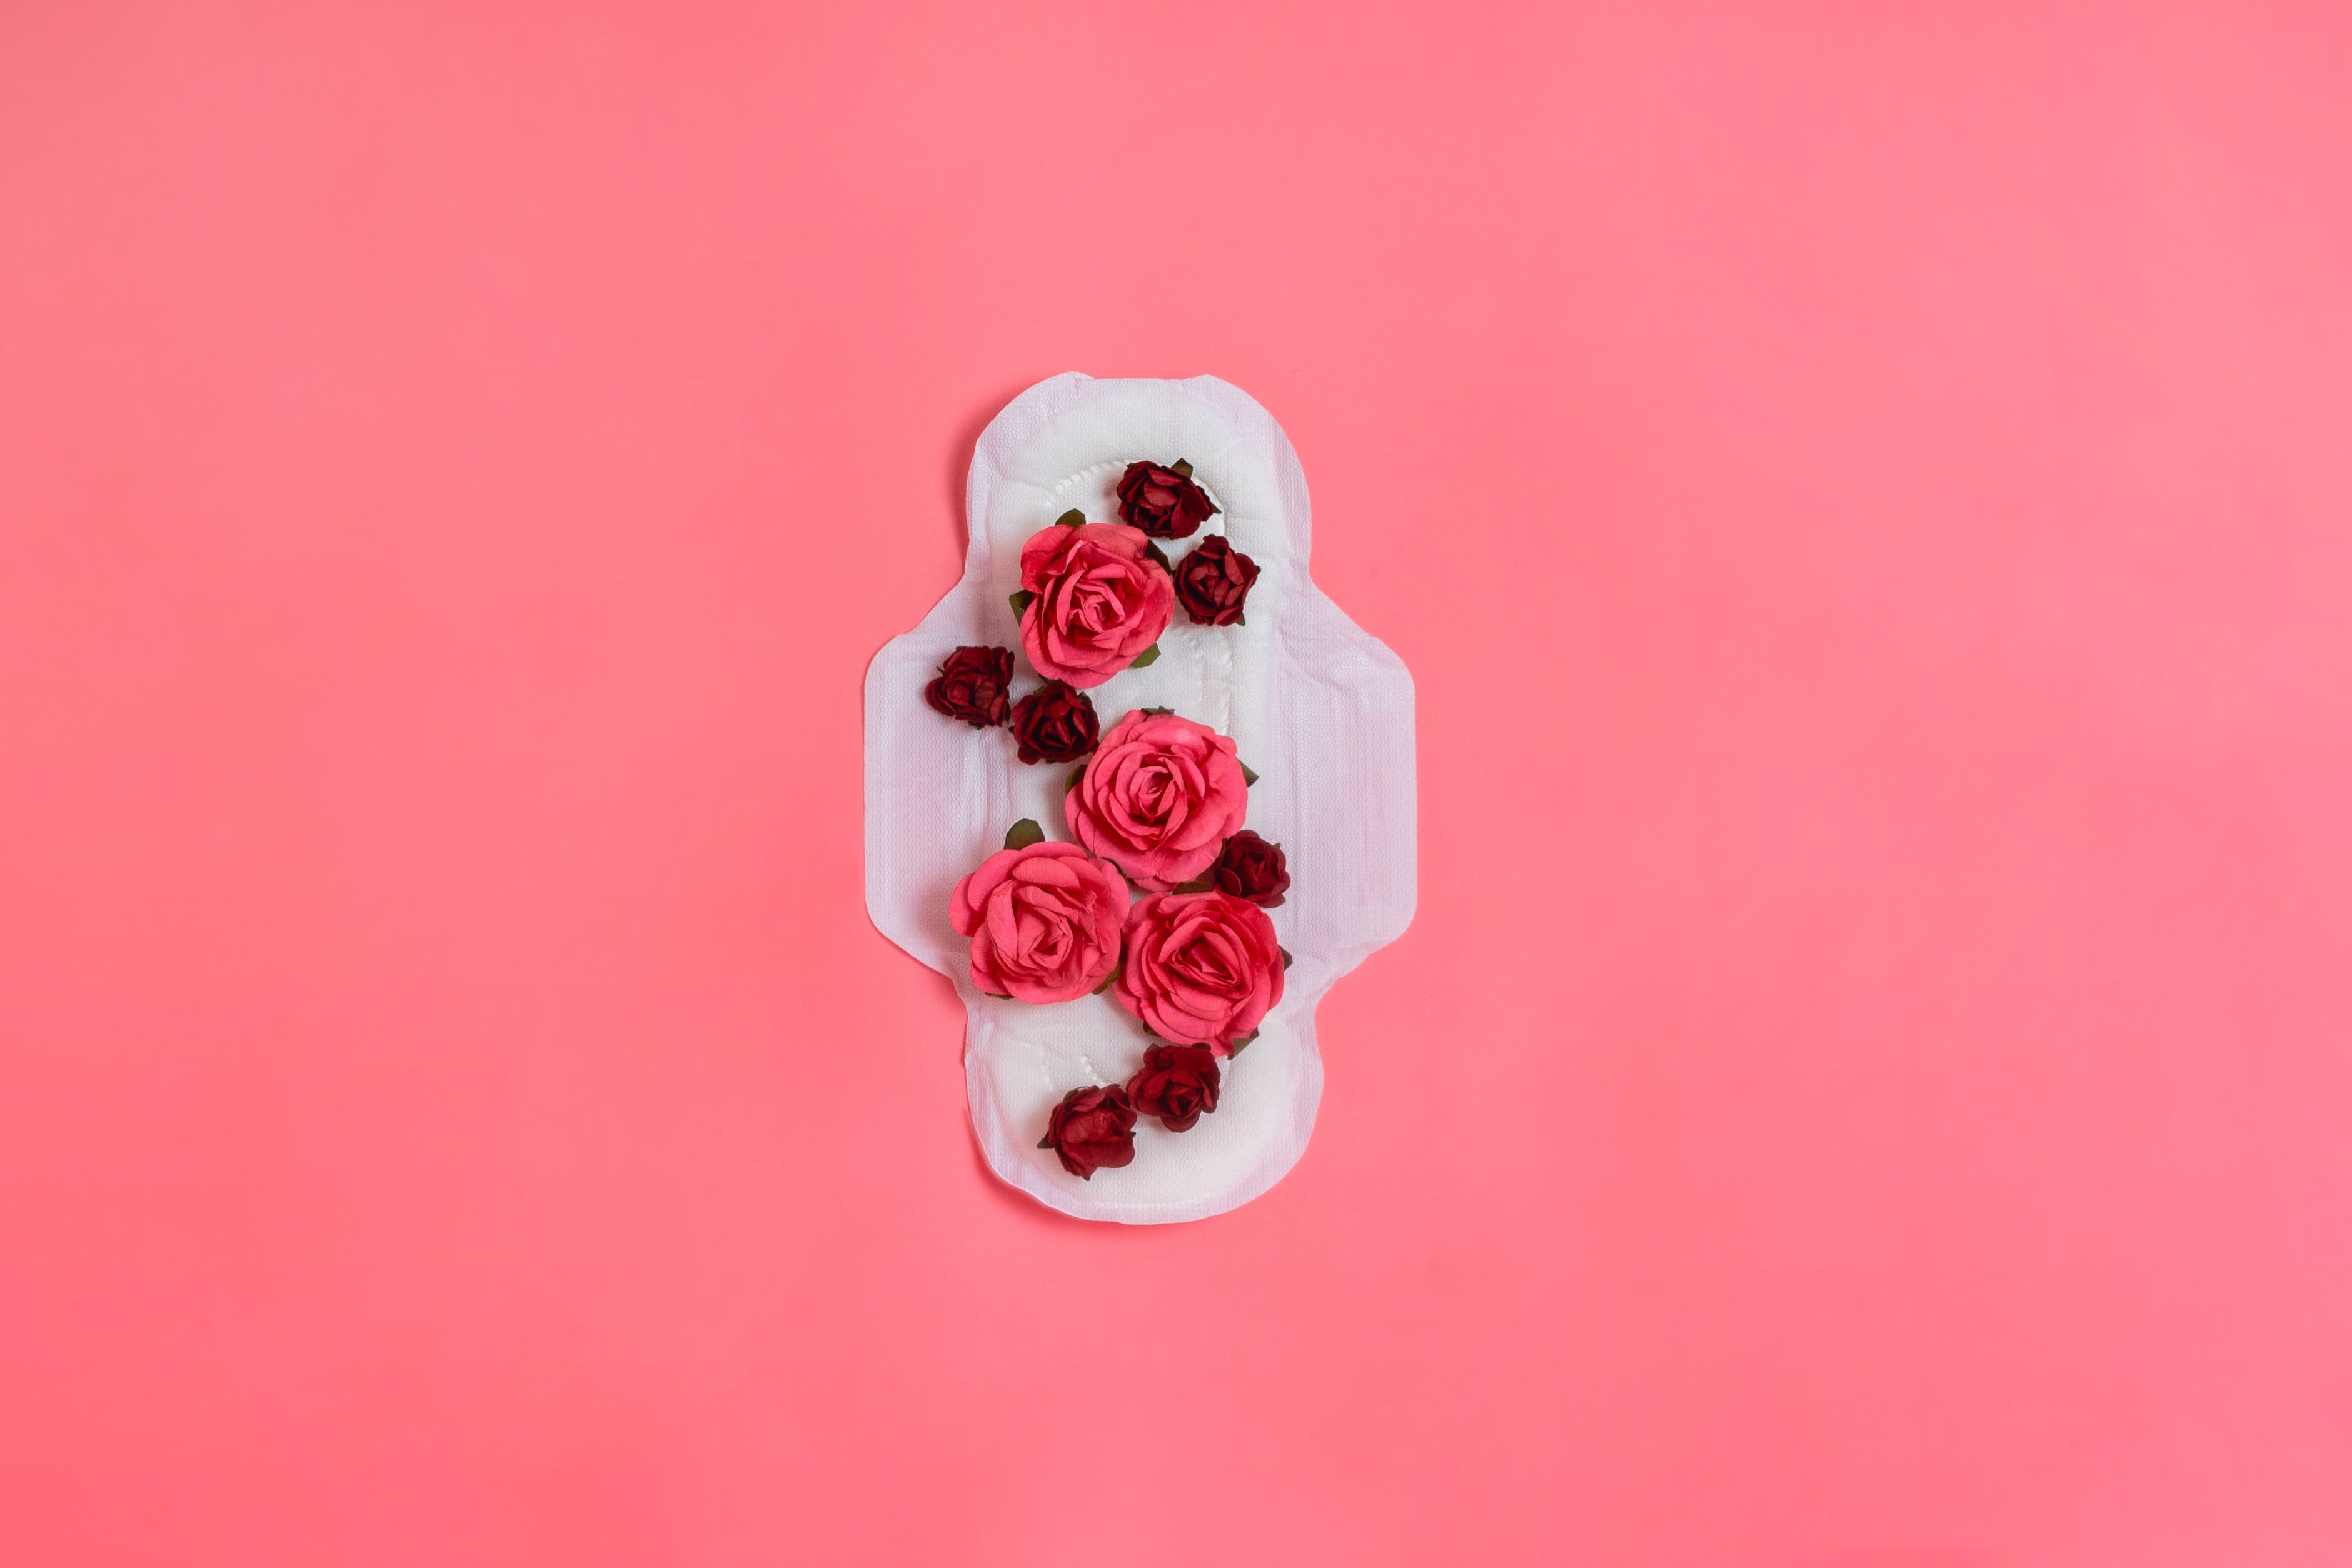 Period Facts Quiz How Much Do You Know About Your Period